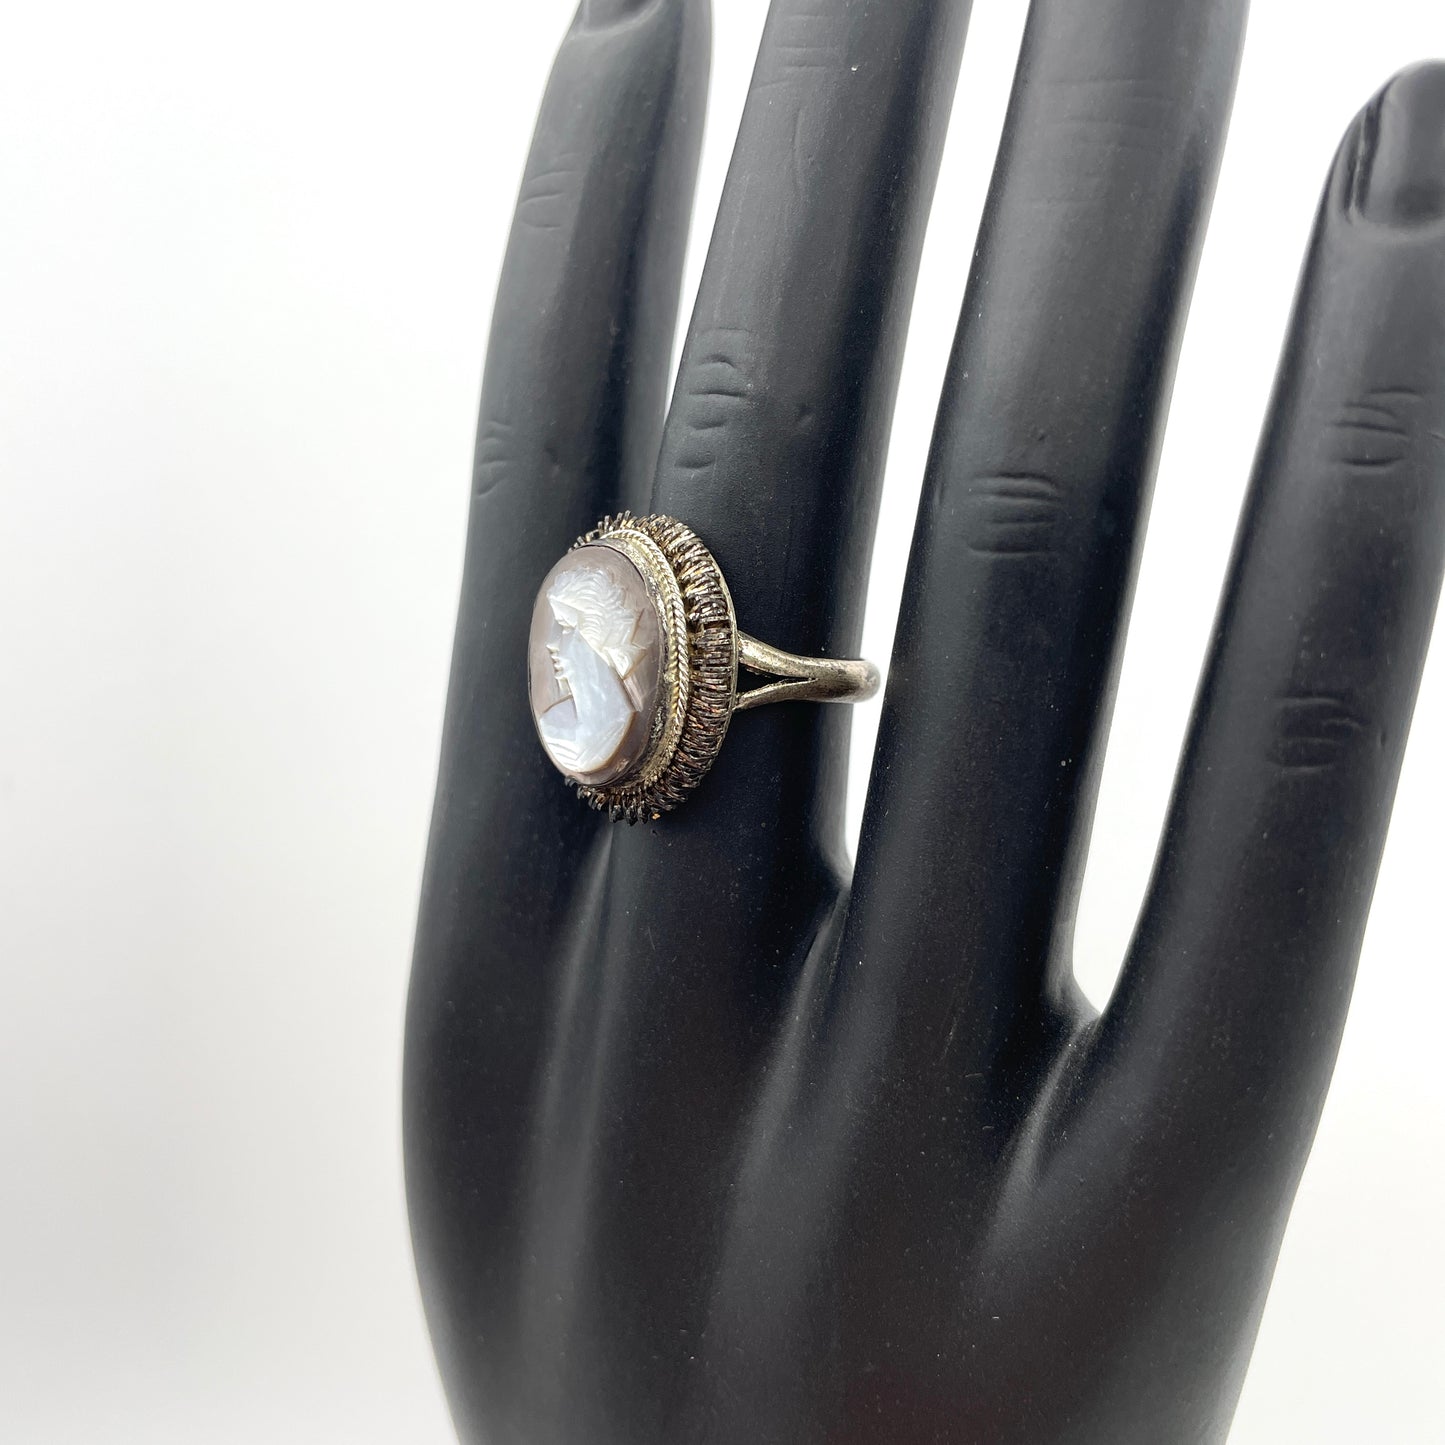 Vintage Cameo Ring - Size 8.5